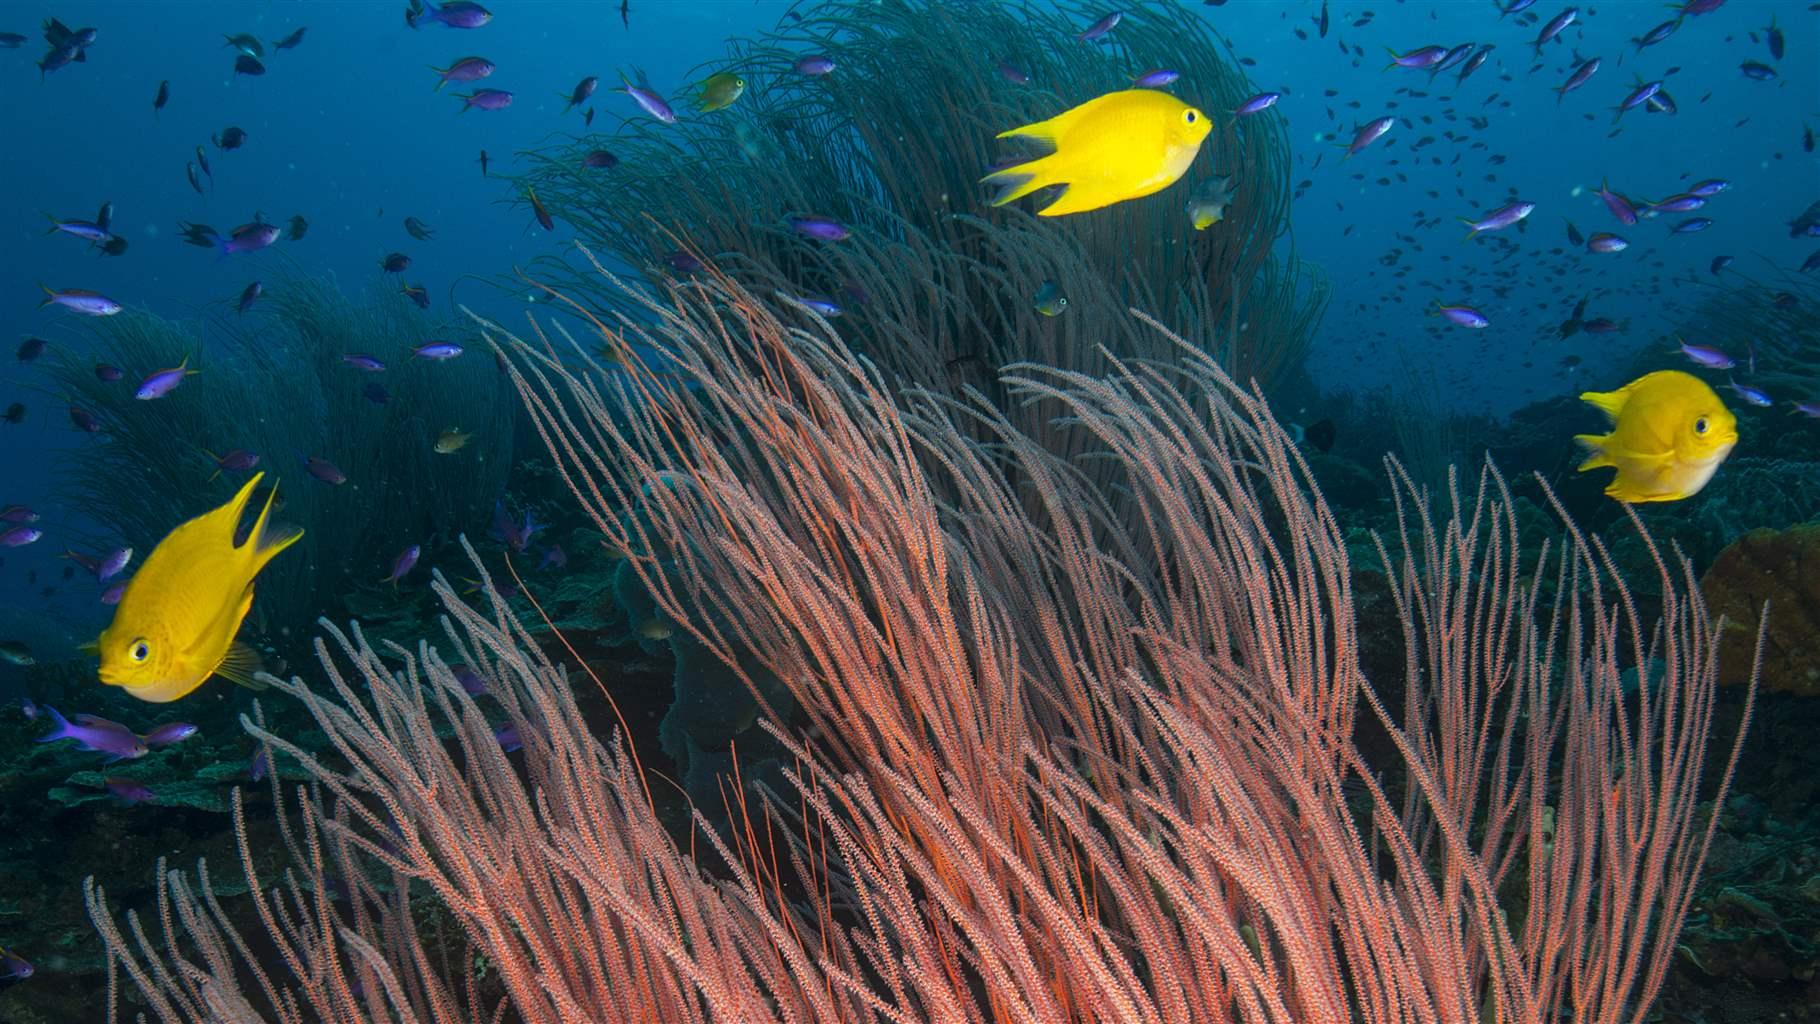 Bright yellow fish swim around the strands of a coral reach up toward the sun. 